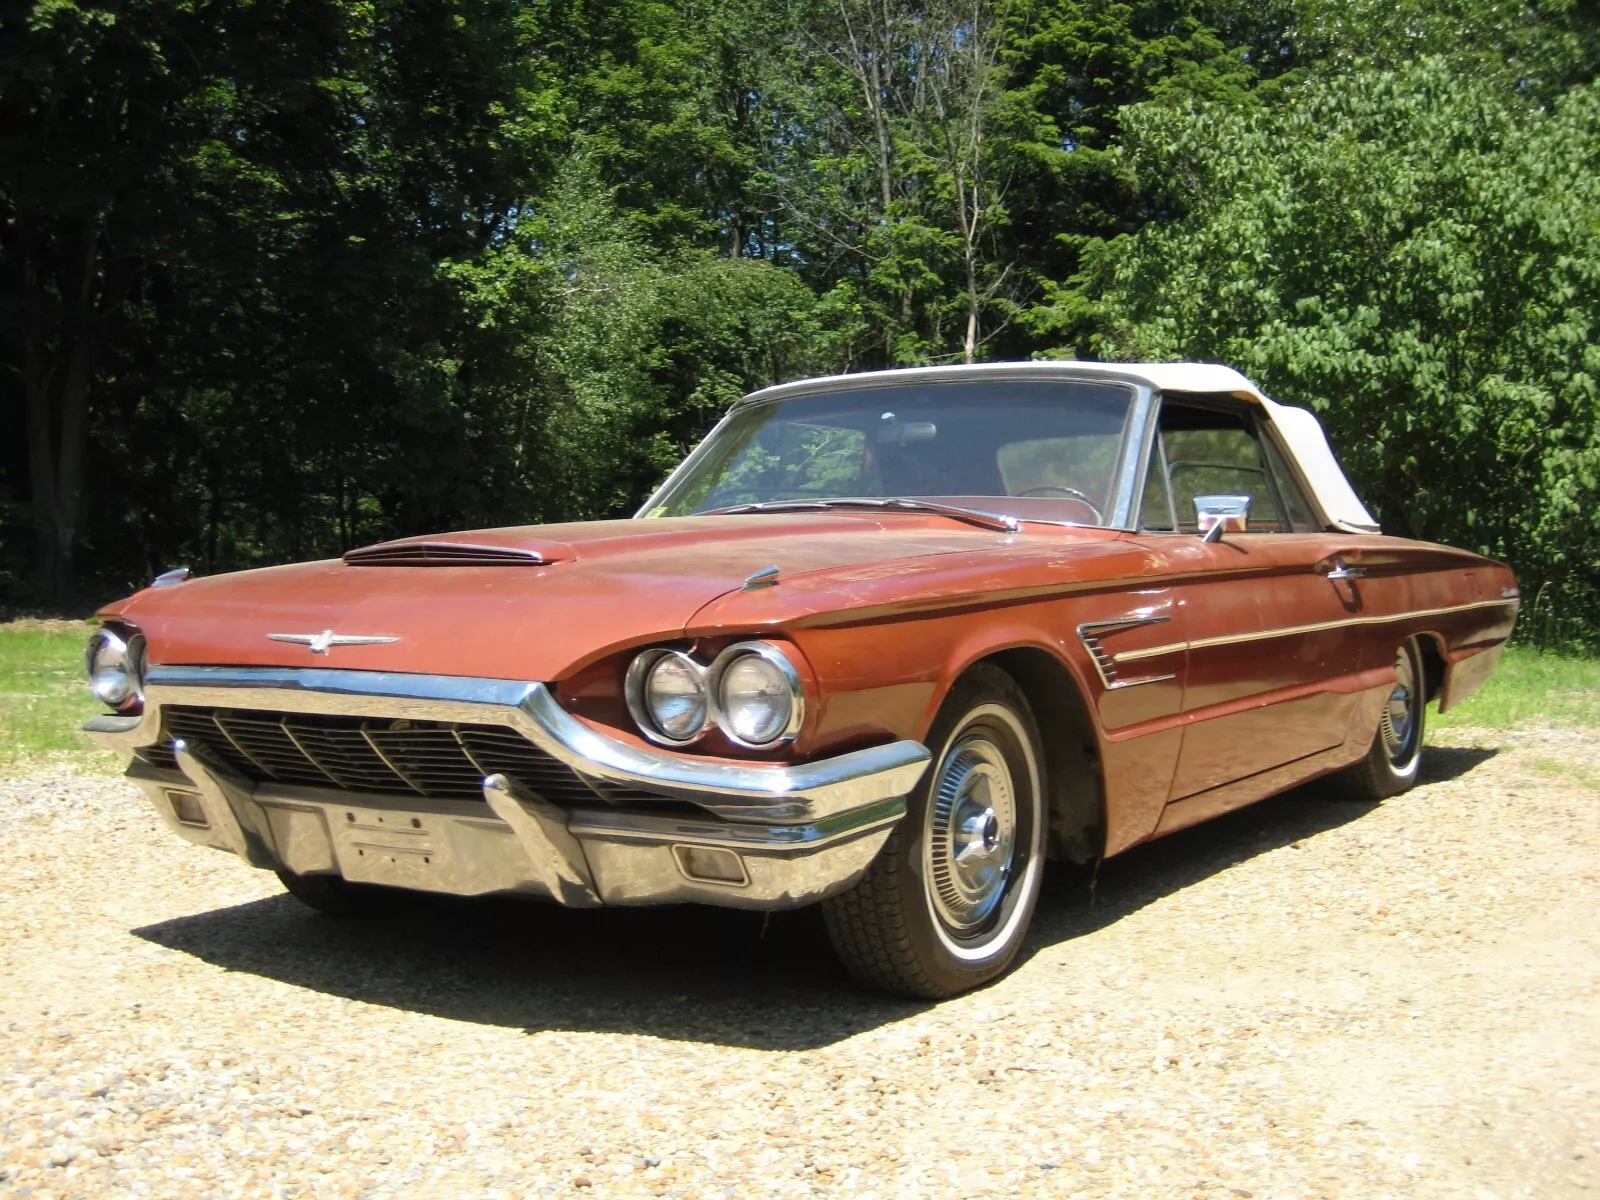 1965 Ford Thunderbird Convertible Emberglo Metallic Paint Barn Find for sale